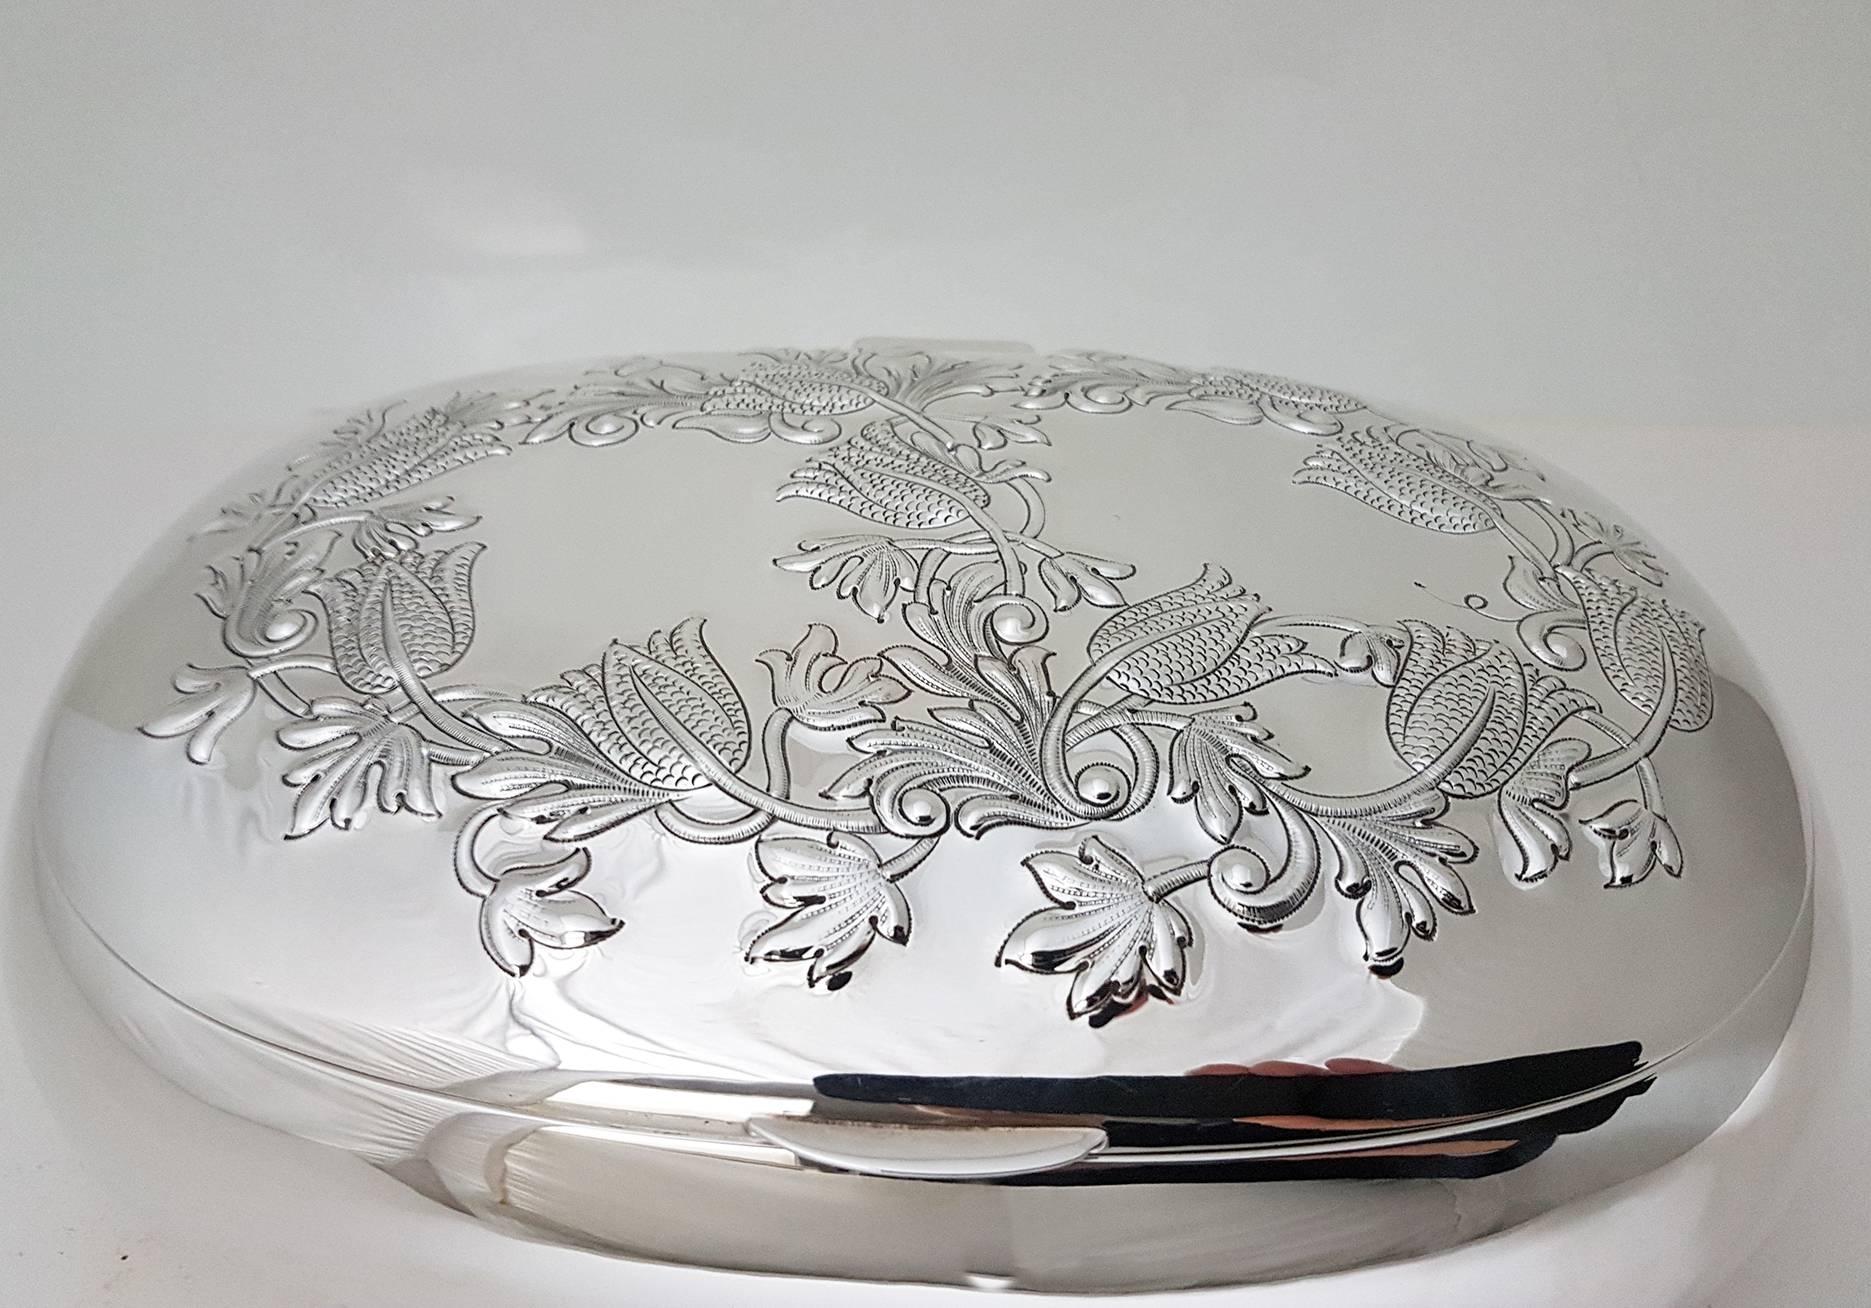 Oblong sterling silver hinged table box.
The body of the box is smooth. The lid is smooth with embossed bellflowers
The lid is embossed and chiseled with bellflowers-shaped motifs
The box is all handmade
